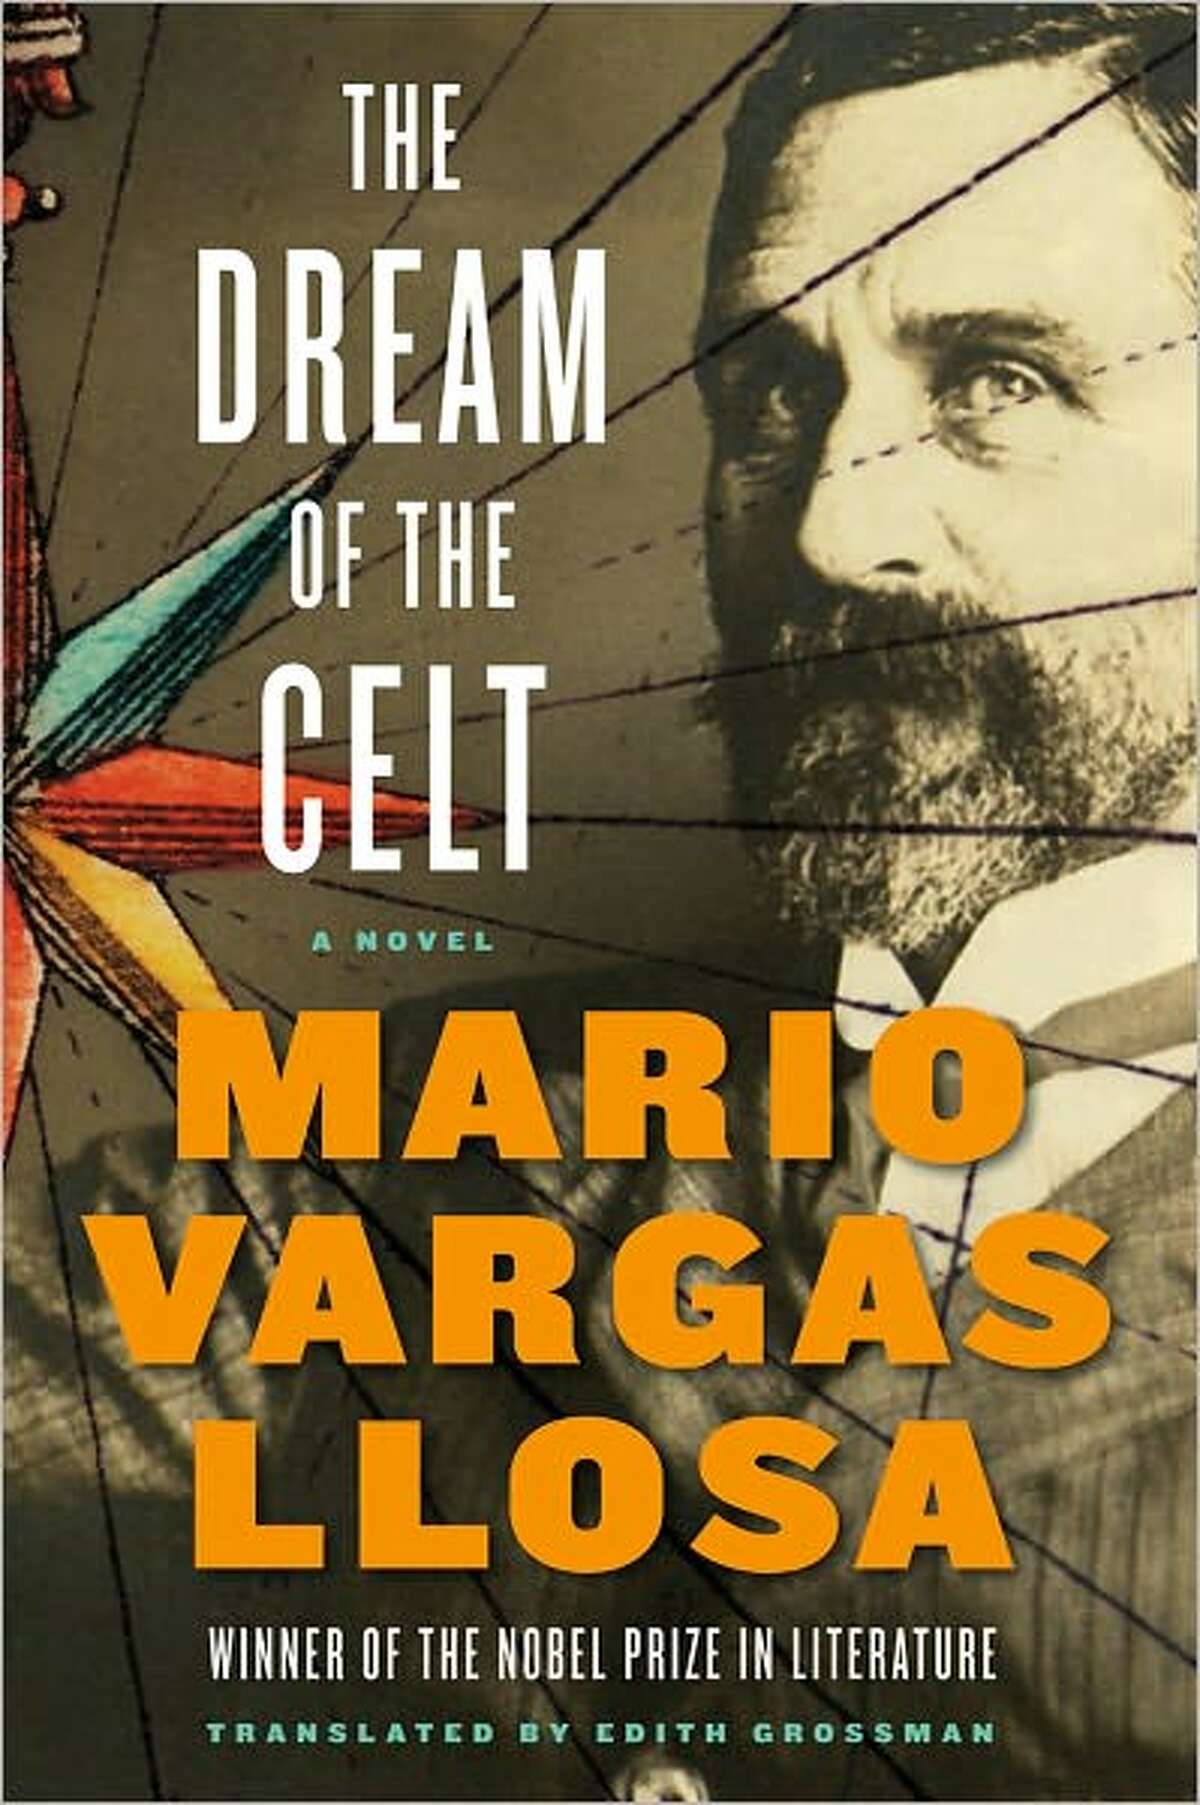 "The Dreamof the Celt," by Mario Vargas Llosa